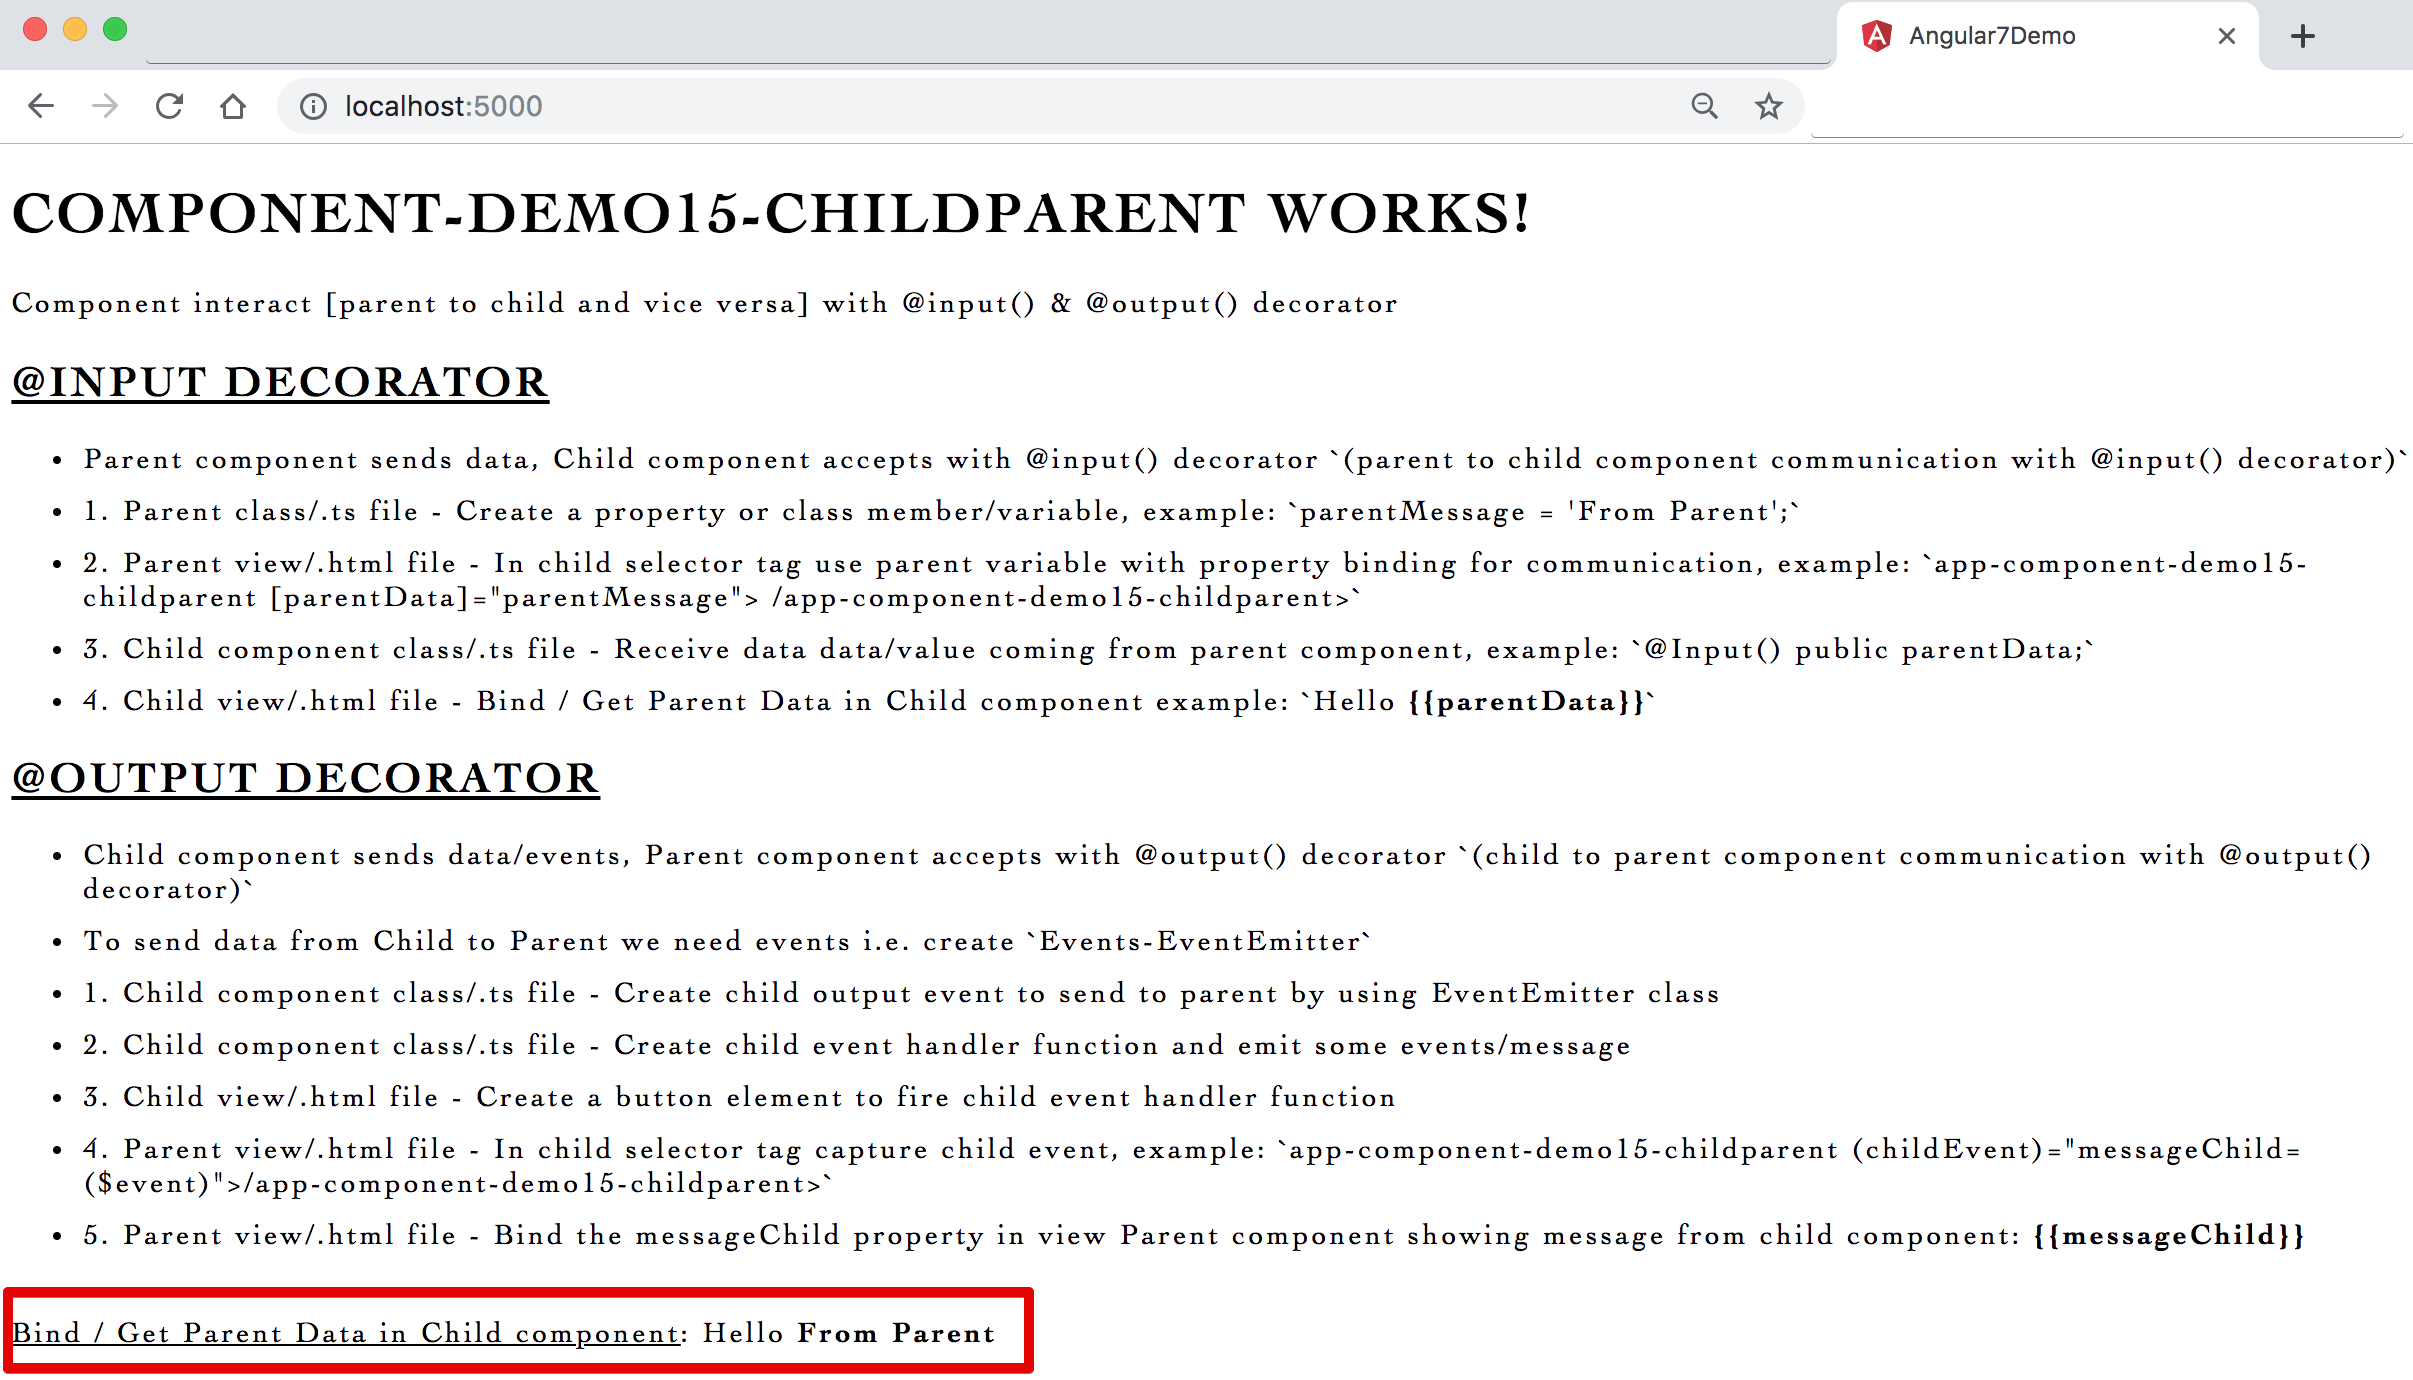 Image - Output - component communication parent to child with input decorator